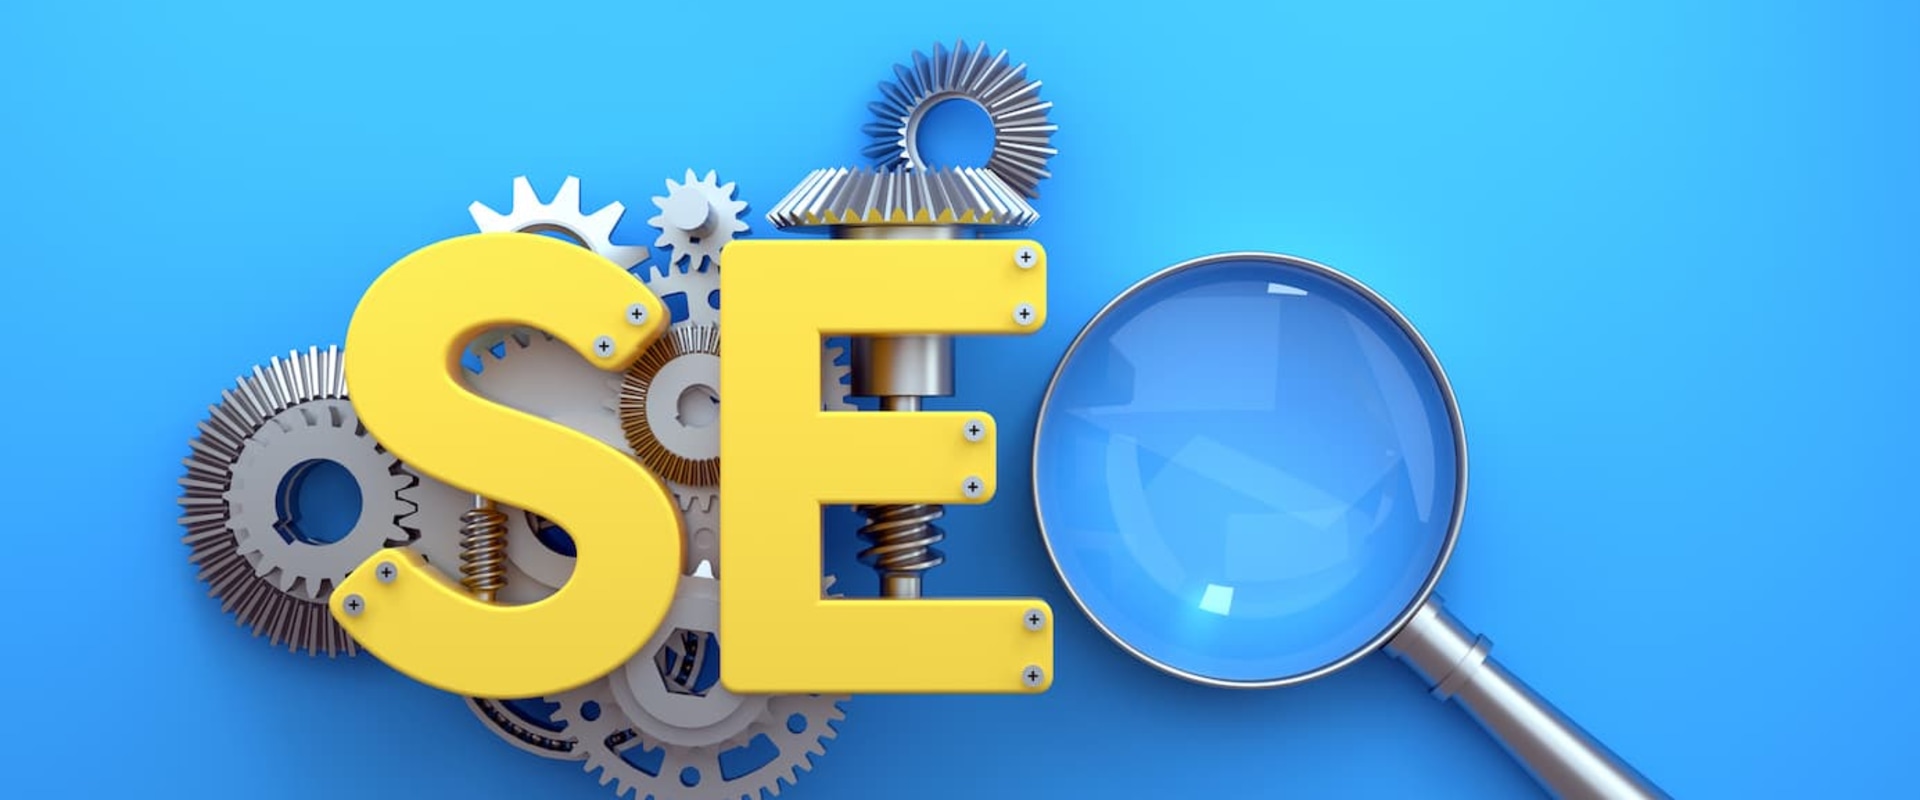 Which is the best company for seo services?